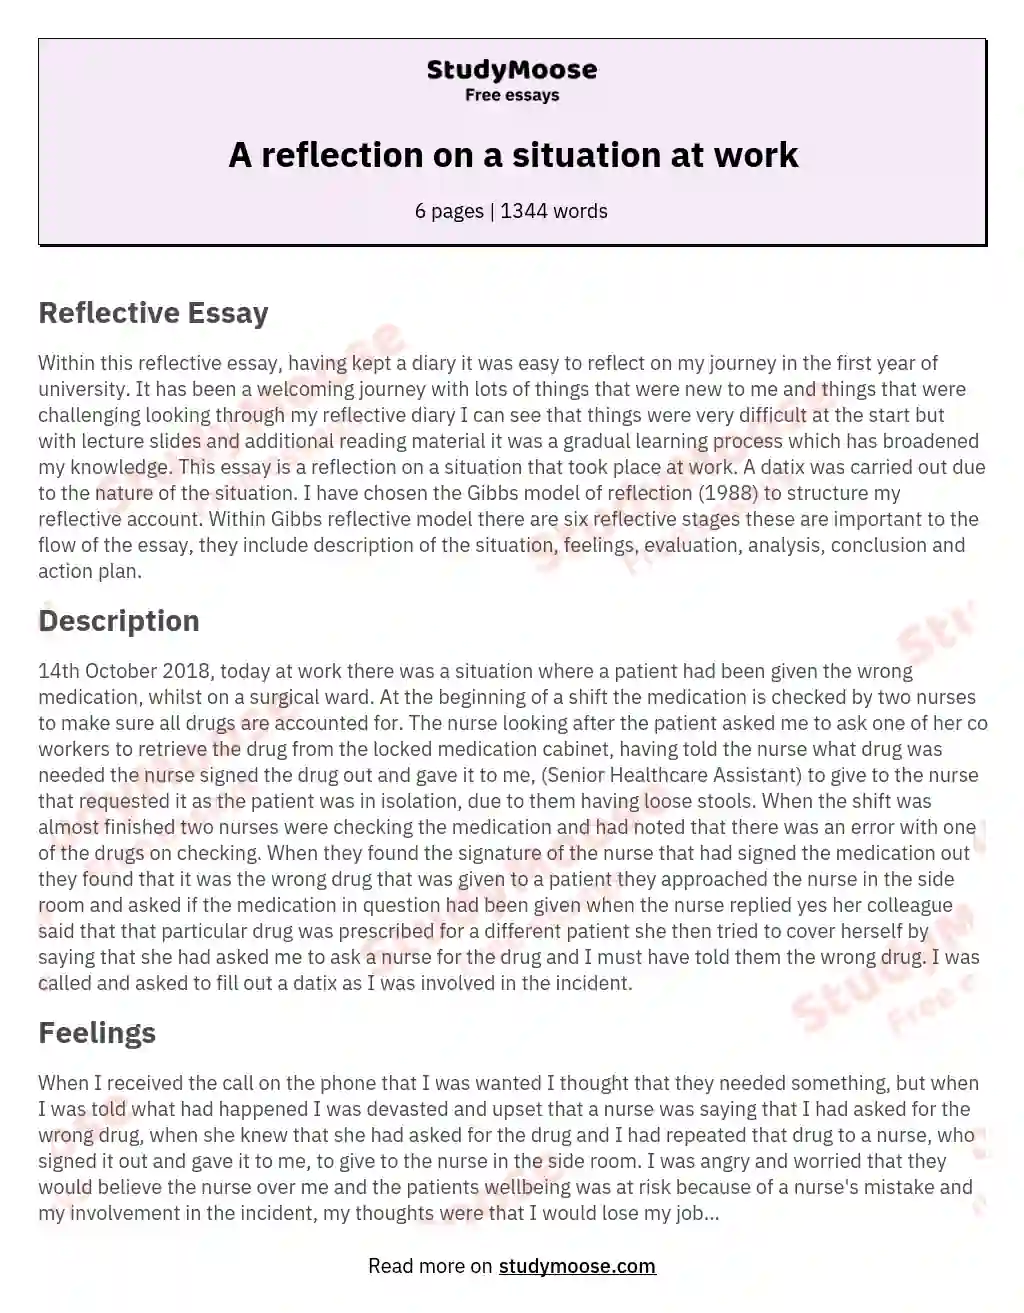 A reflection on a situation at work essay